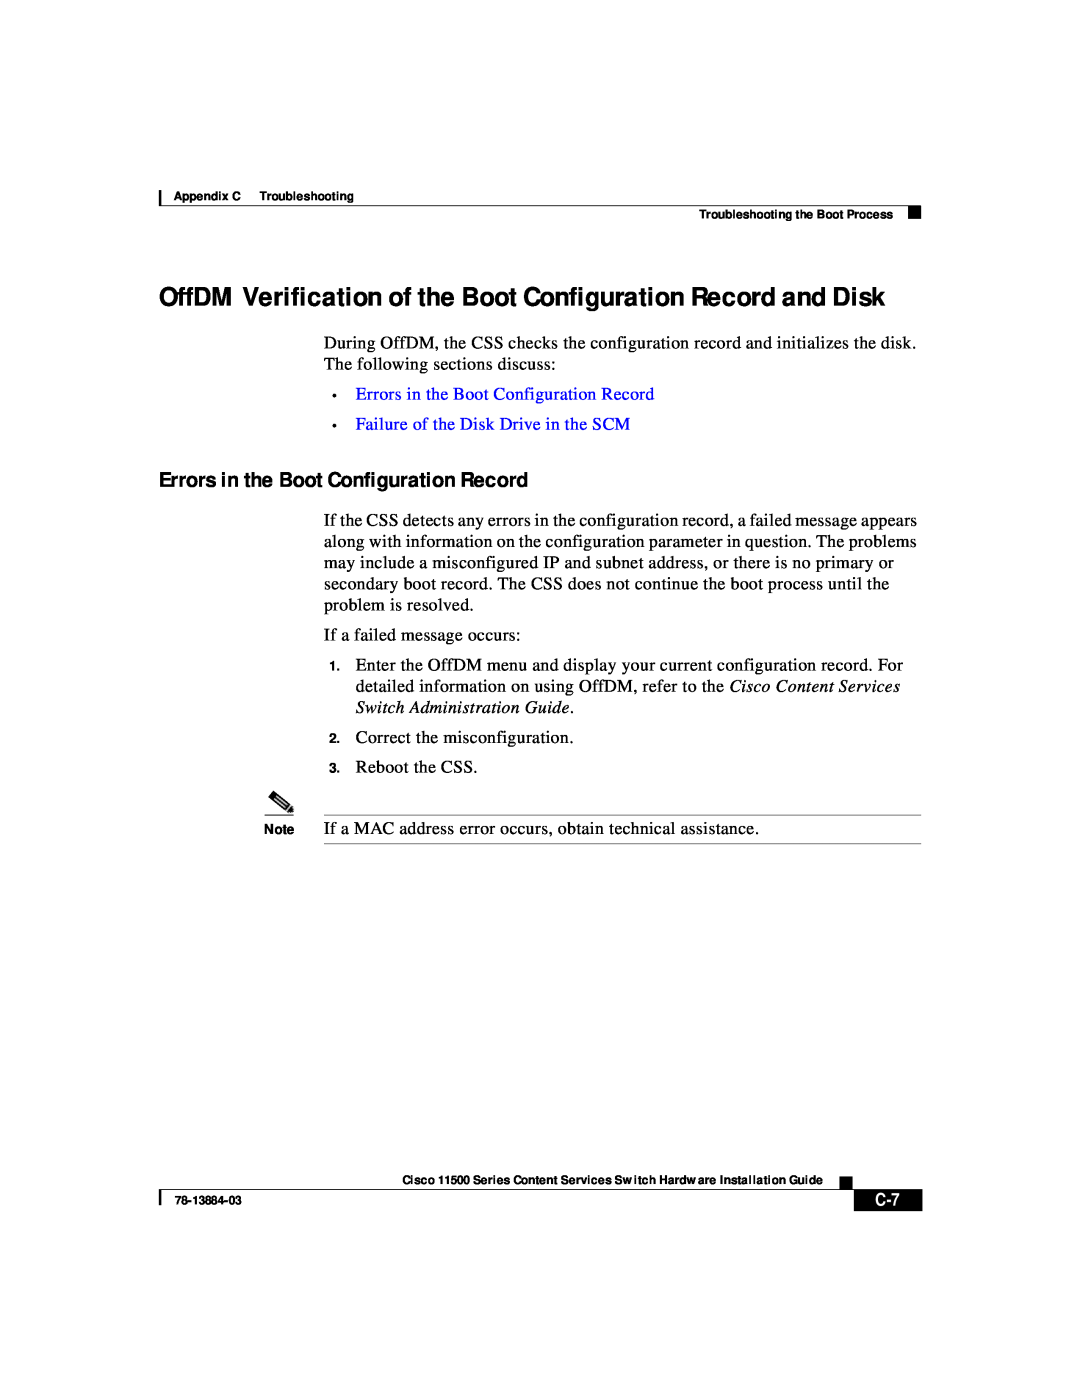 Cisco Systems 11500 Series manual OffDM Verification of the Boot Configuration Record and Disk 